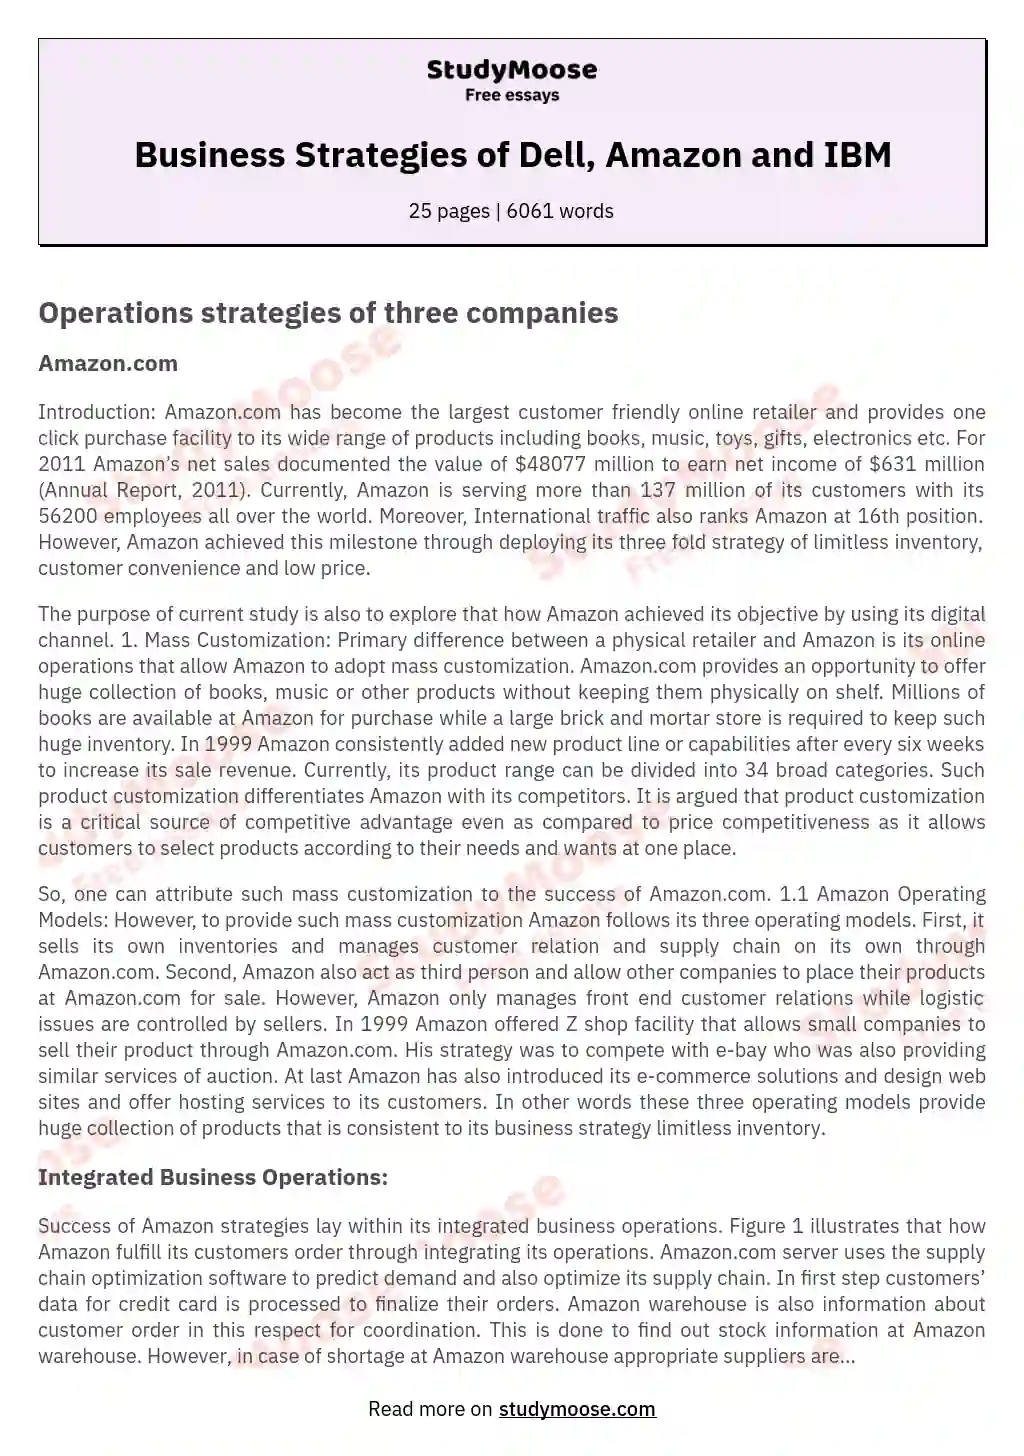 Business Strategies of Dell, Amazon and IBM